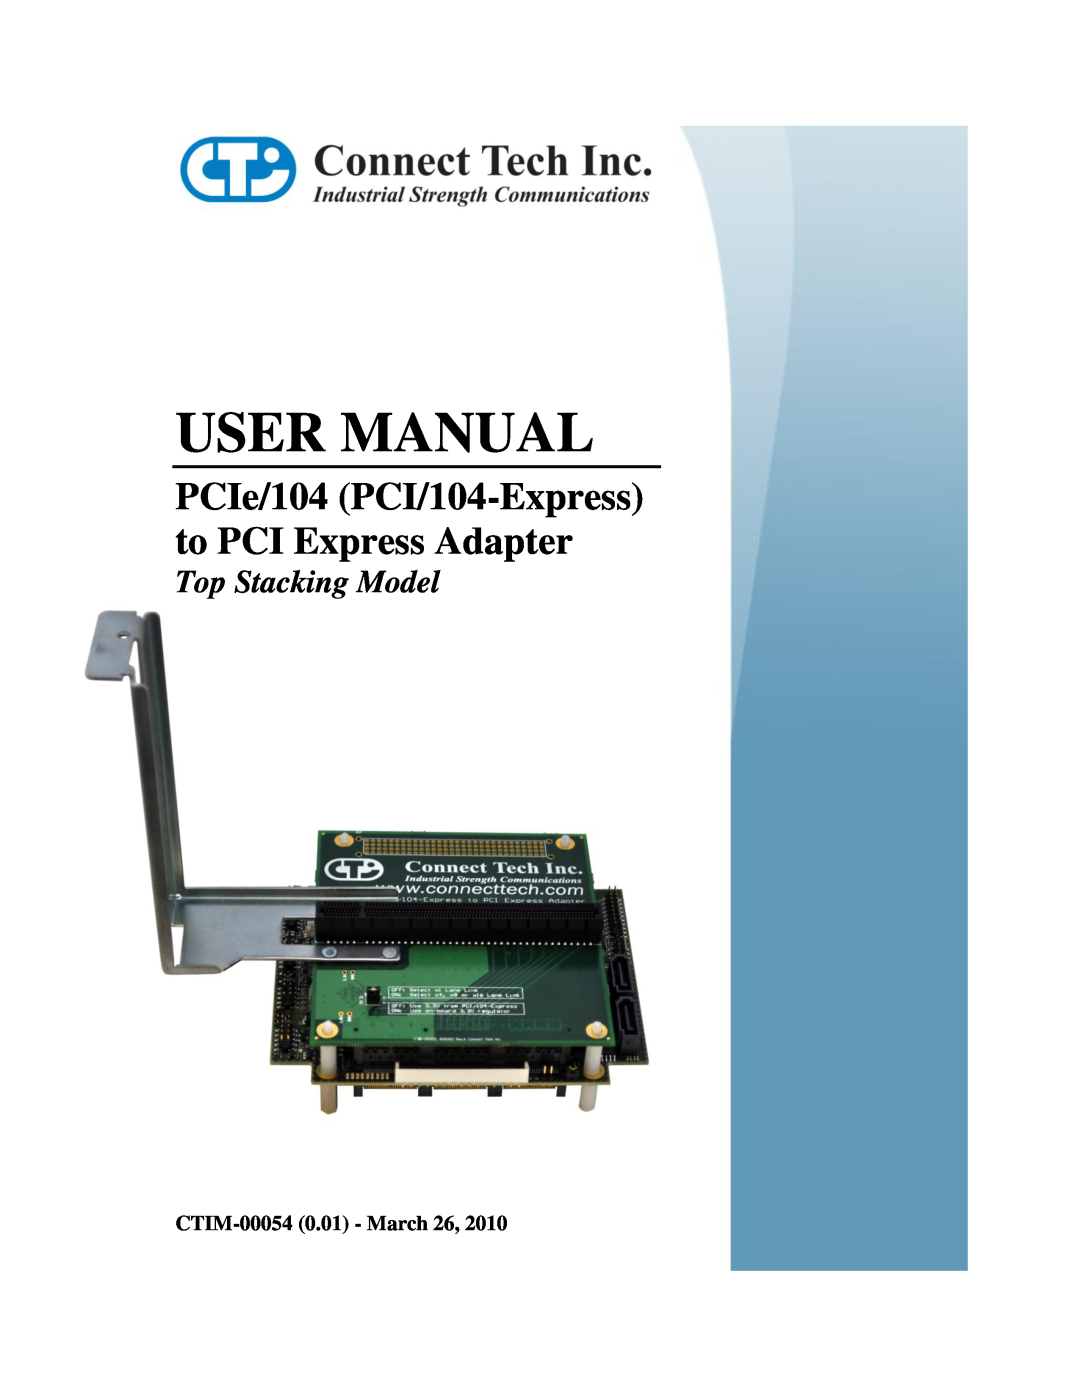 Connect Tech user manual CTIM-00054 0.01 - March 26, User Manual, PCIe/104 PCI/104-Express to PCI Express Adapter 